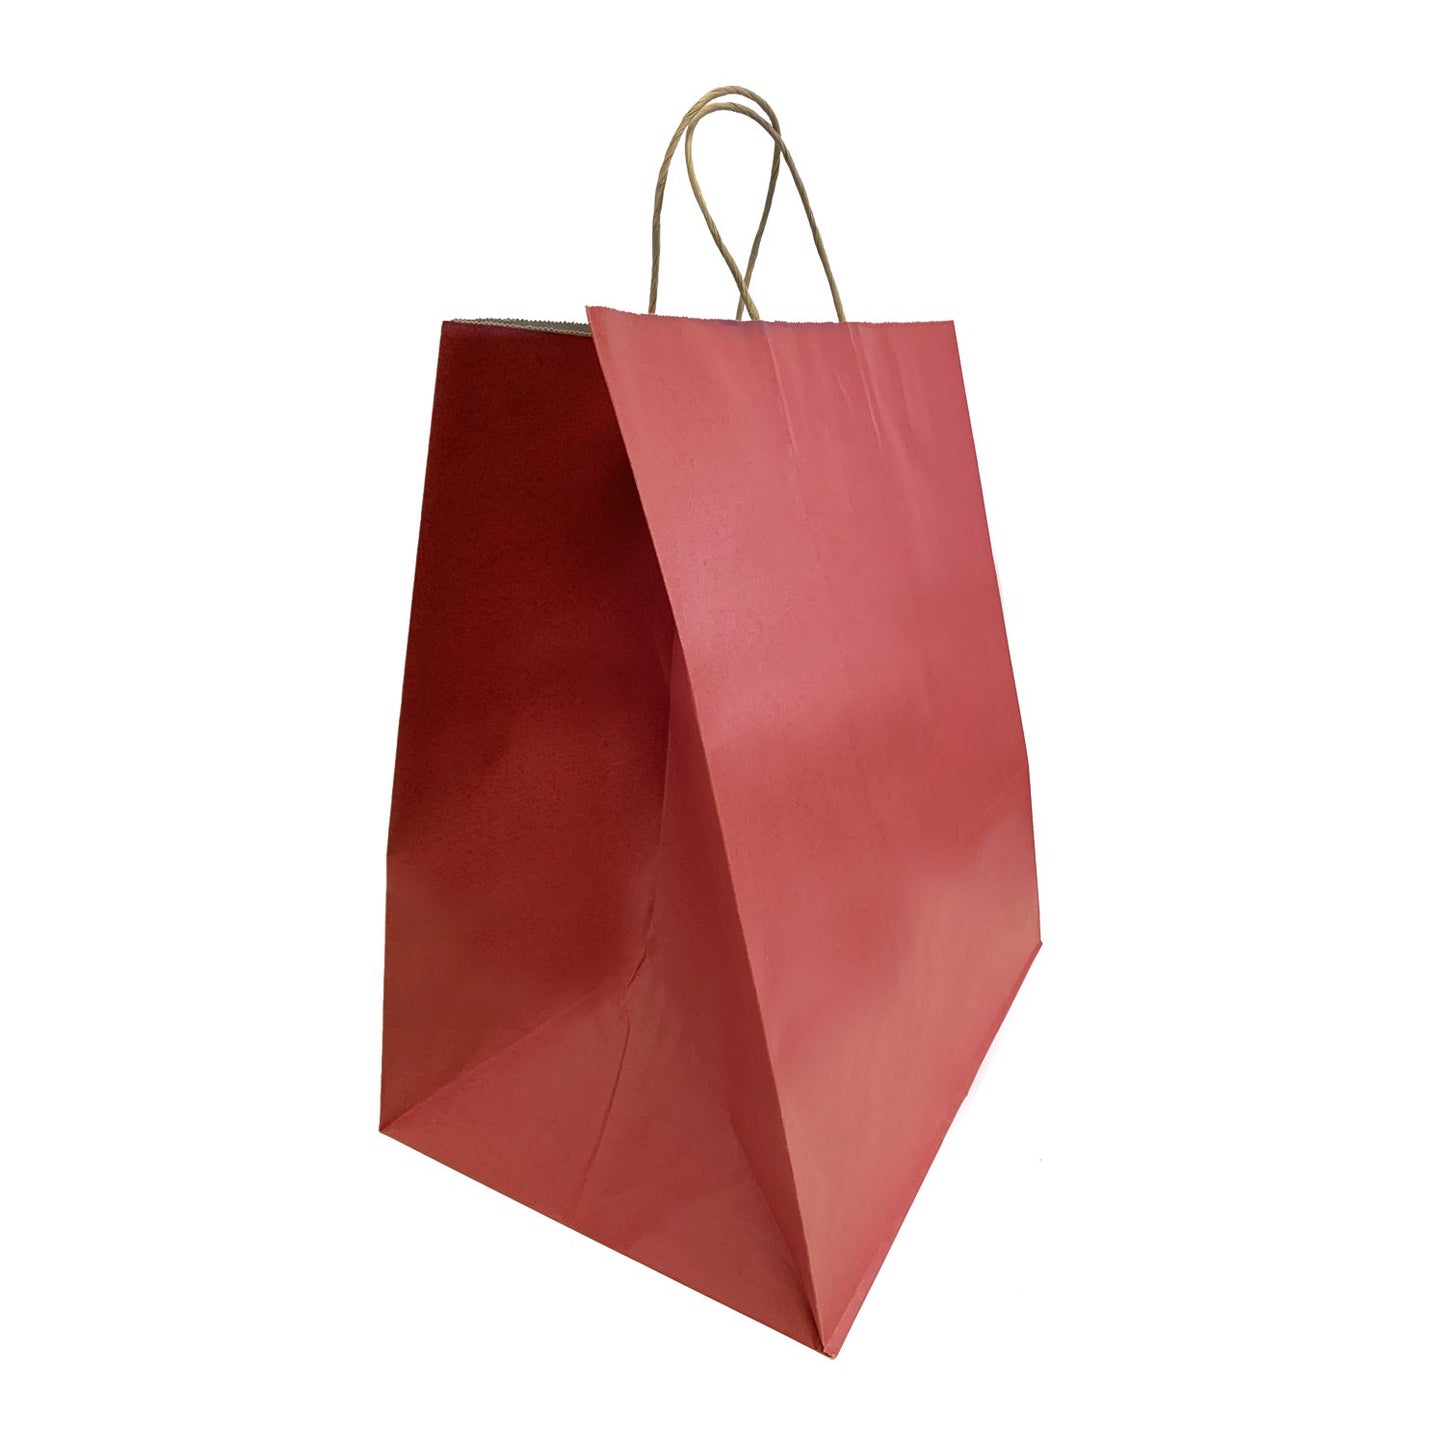 200 Pcs, Super Royal, 14x10x15.75 inches, Burgundy Kraft Paper Bags, with Twisted Handle